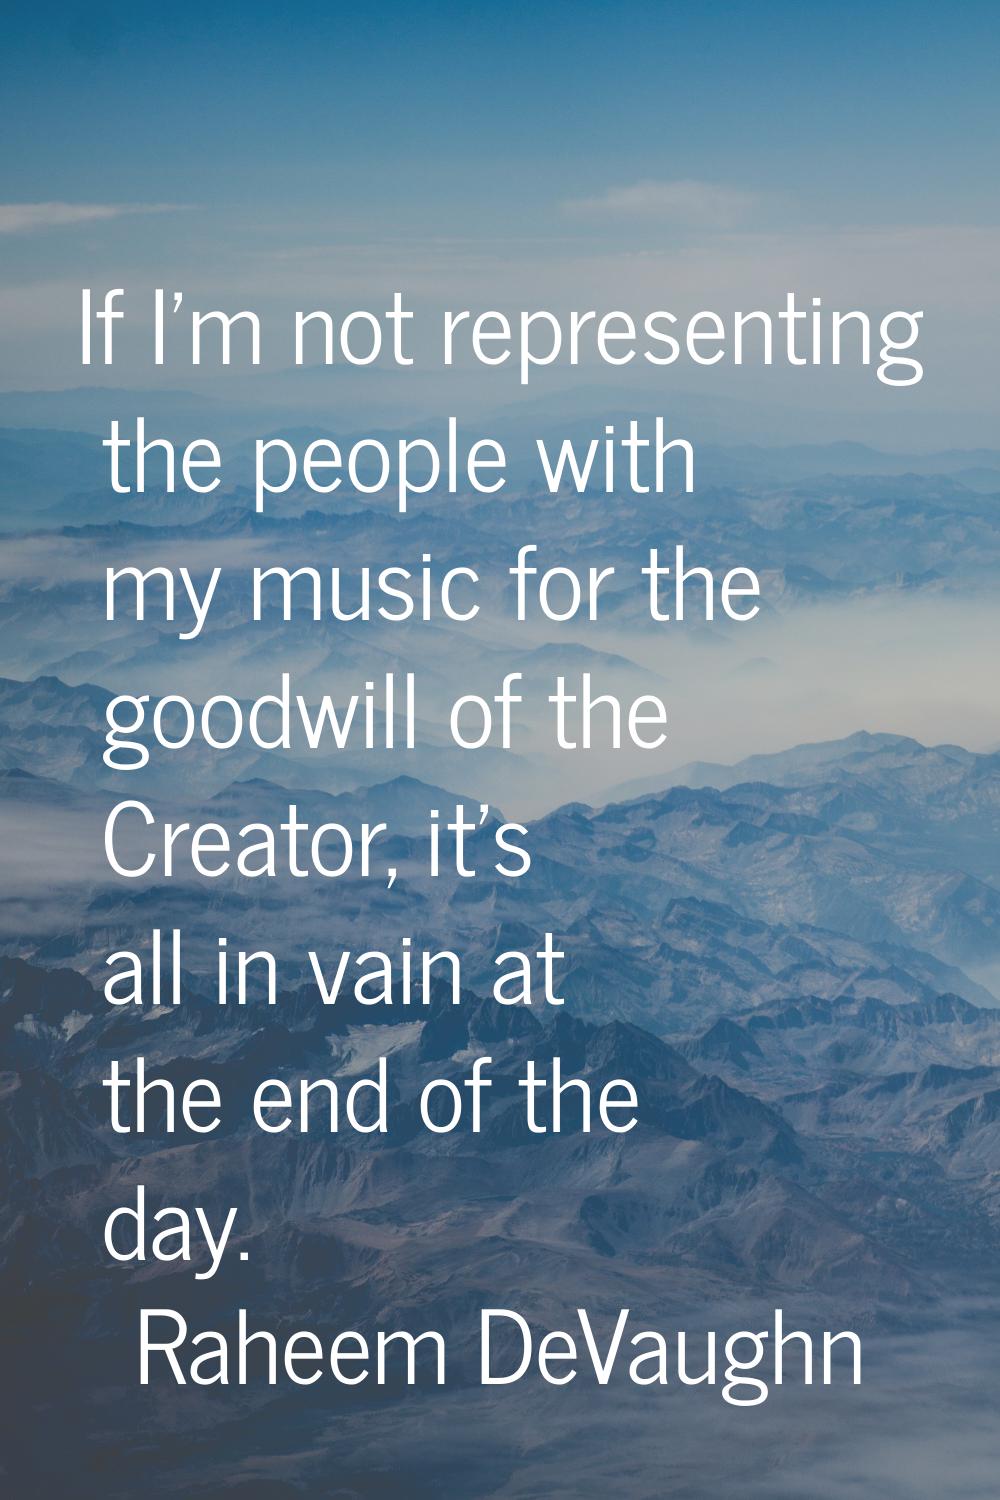 If I'm not representing the people with my music for the goodwill of the Creator, it's all in vain 